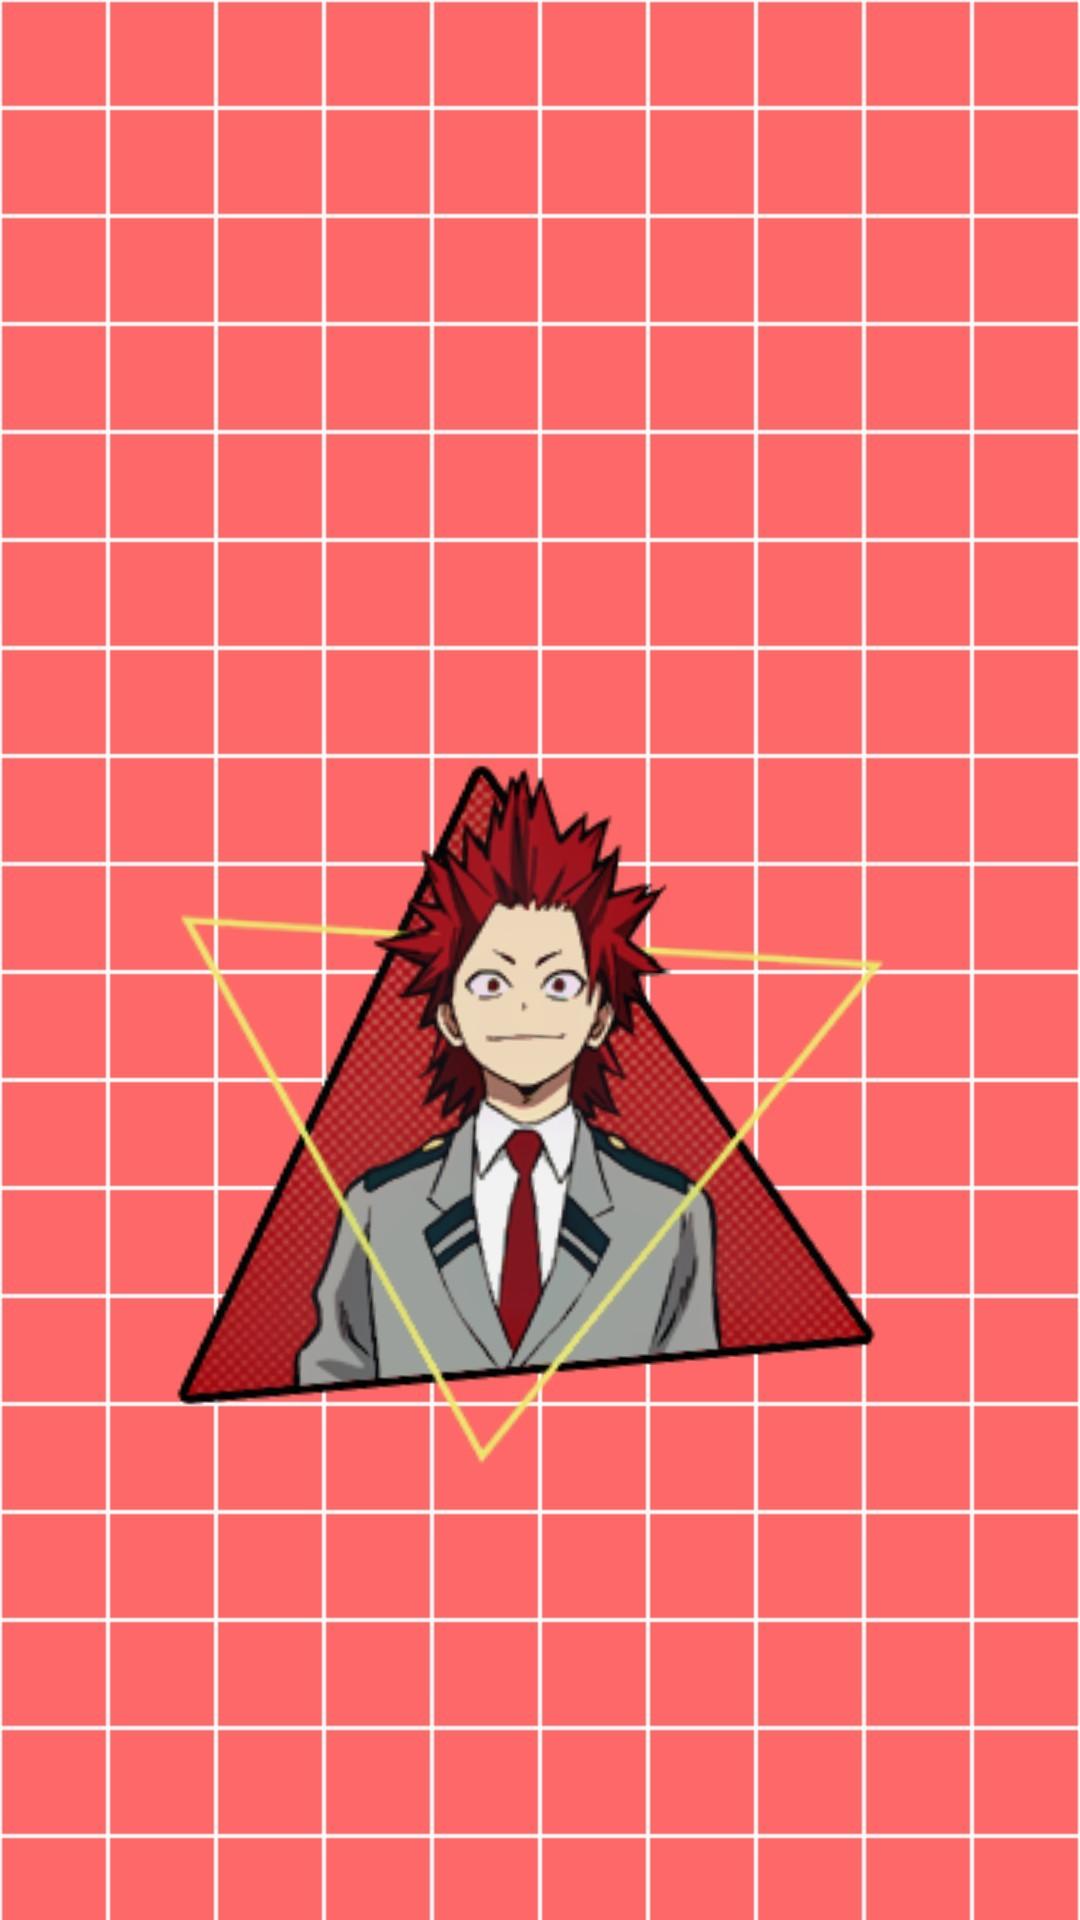 bnha wallpapers